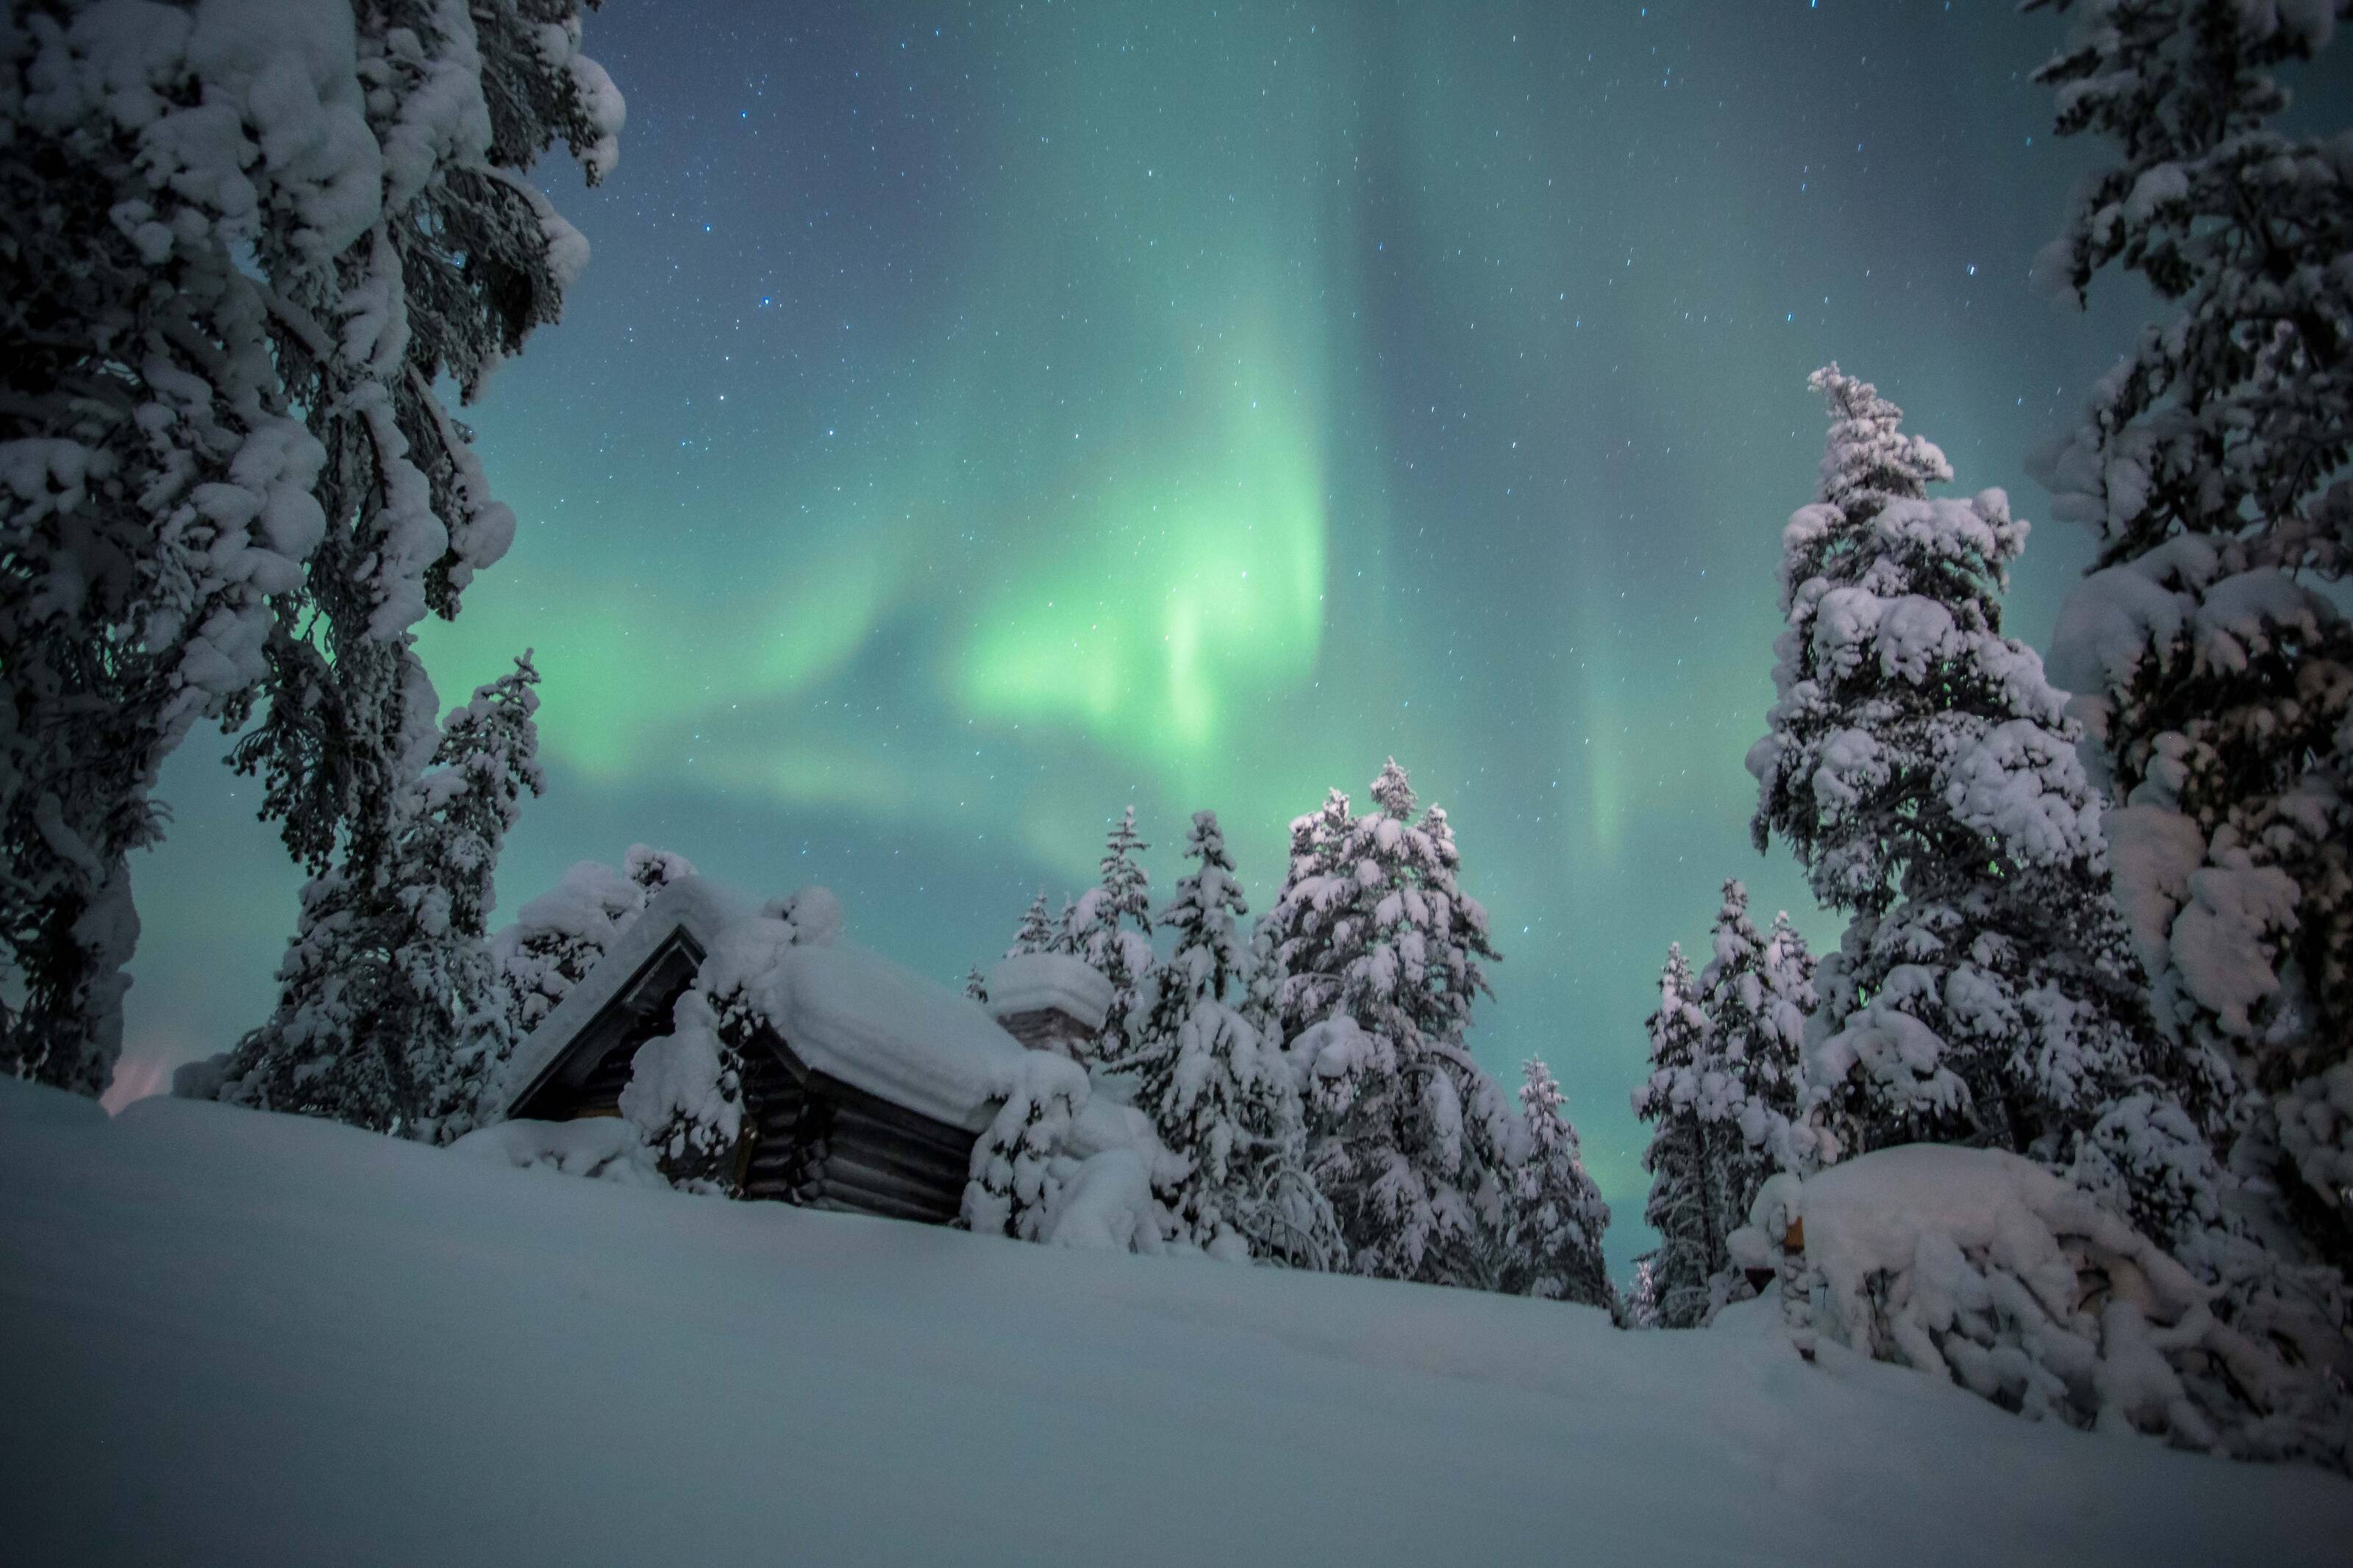 snow covered cottage and the Northern Lights in Lapland